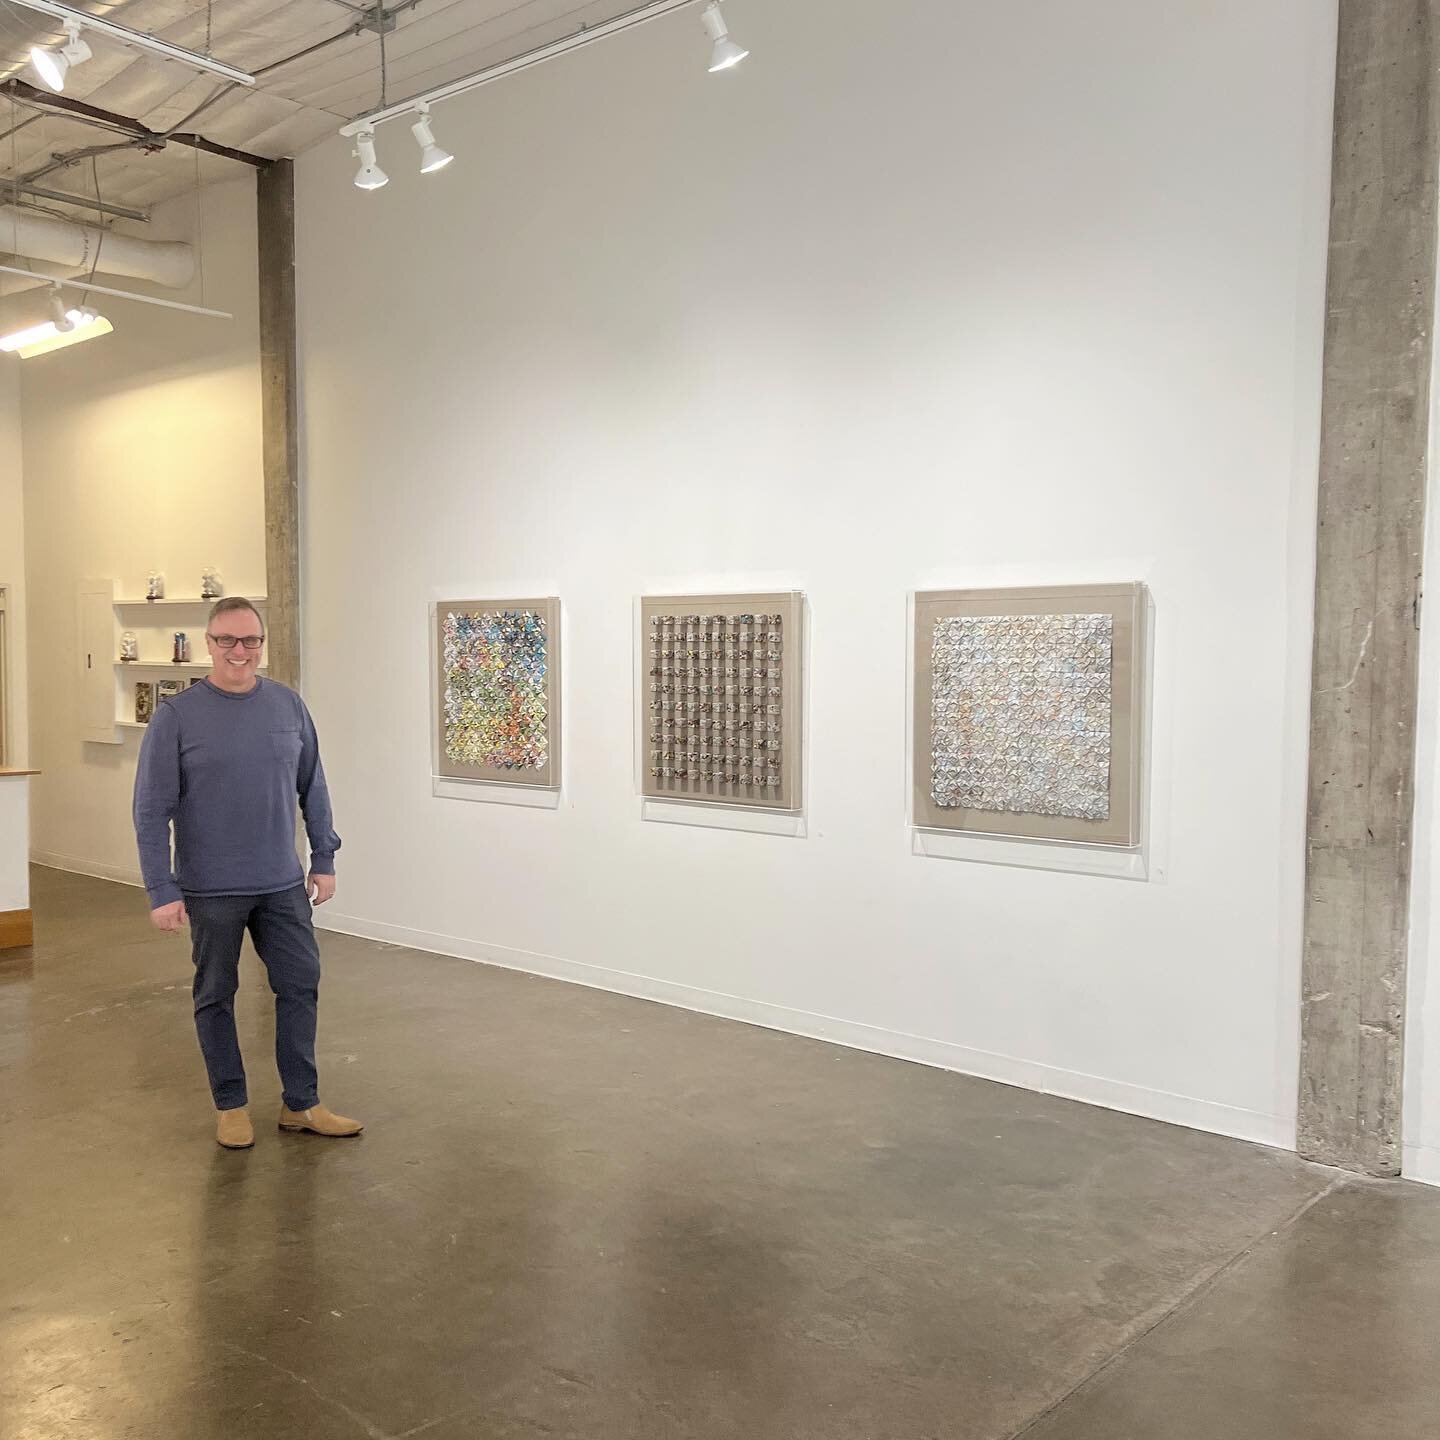 Hung out with @shawnathon01 today to hear more about his paper works at @icosa_art. Absolutely enthralled by the detail in these woven paper pieces. Truly mesmerizing!